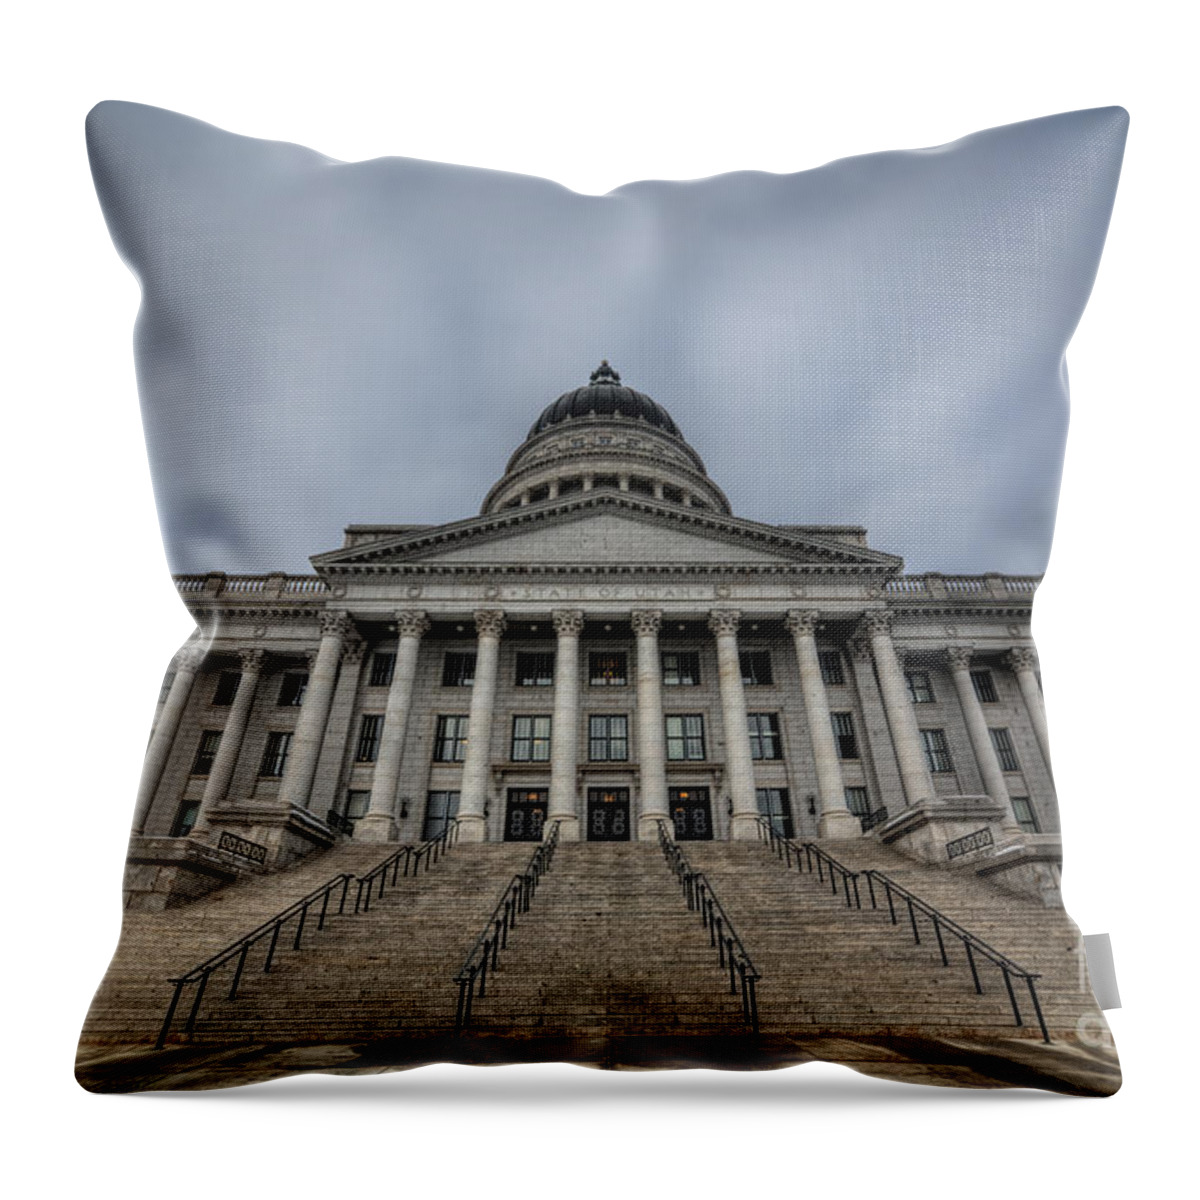 Hdr Throw Pillow featuring the photograph Utah State Capitol Building by Michael Ver Sprill